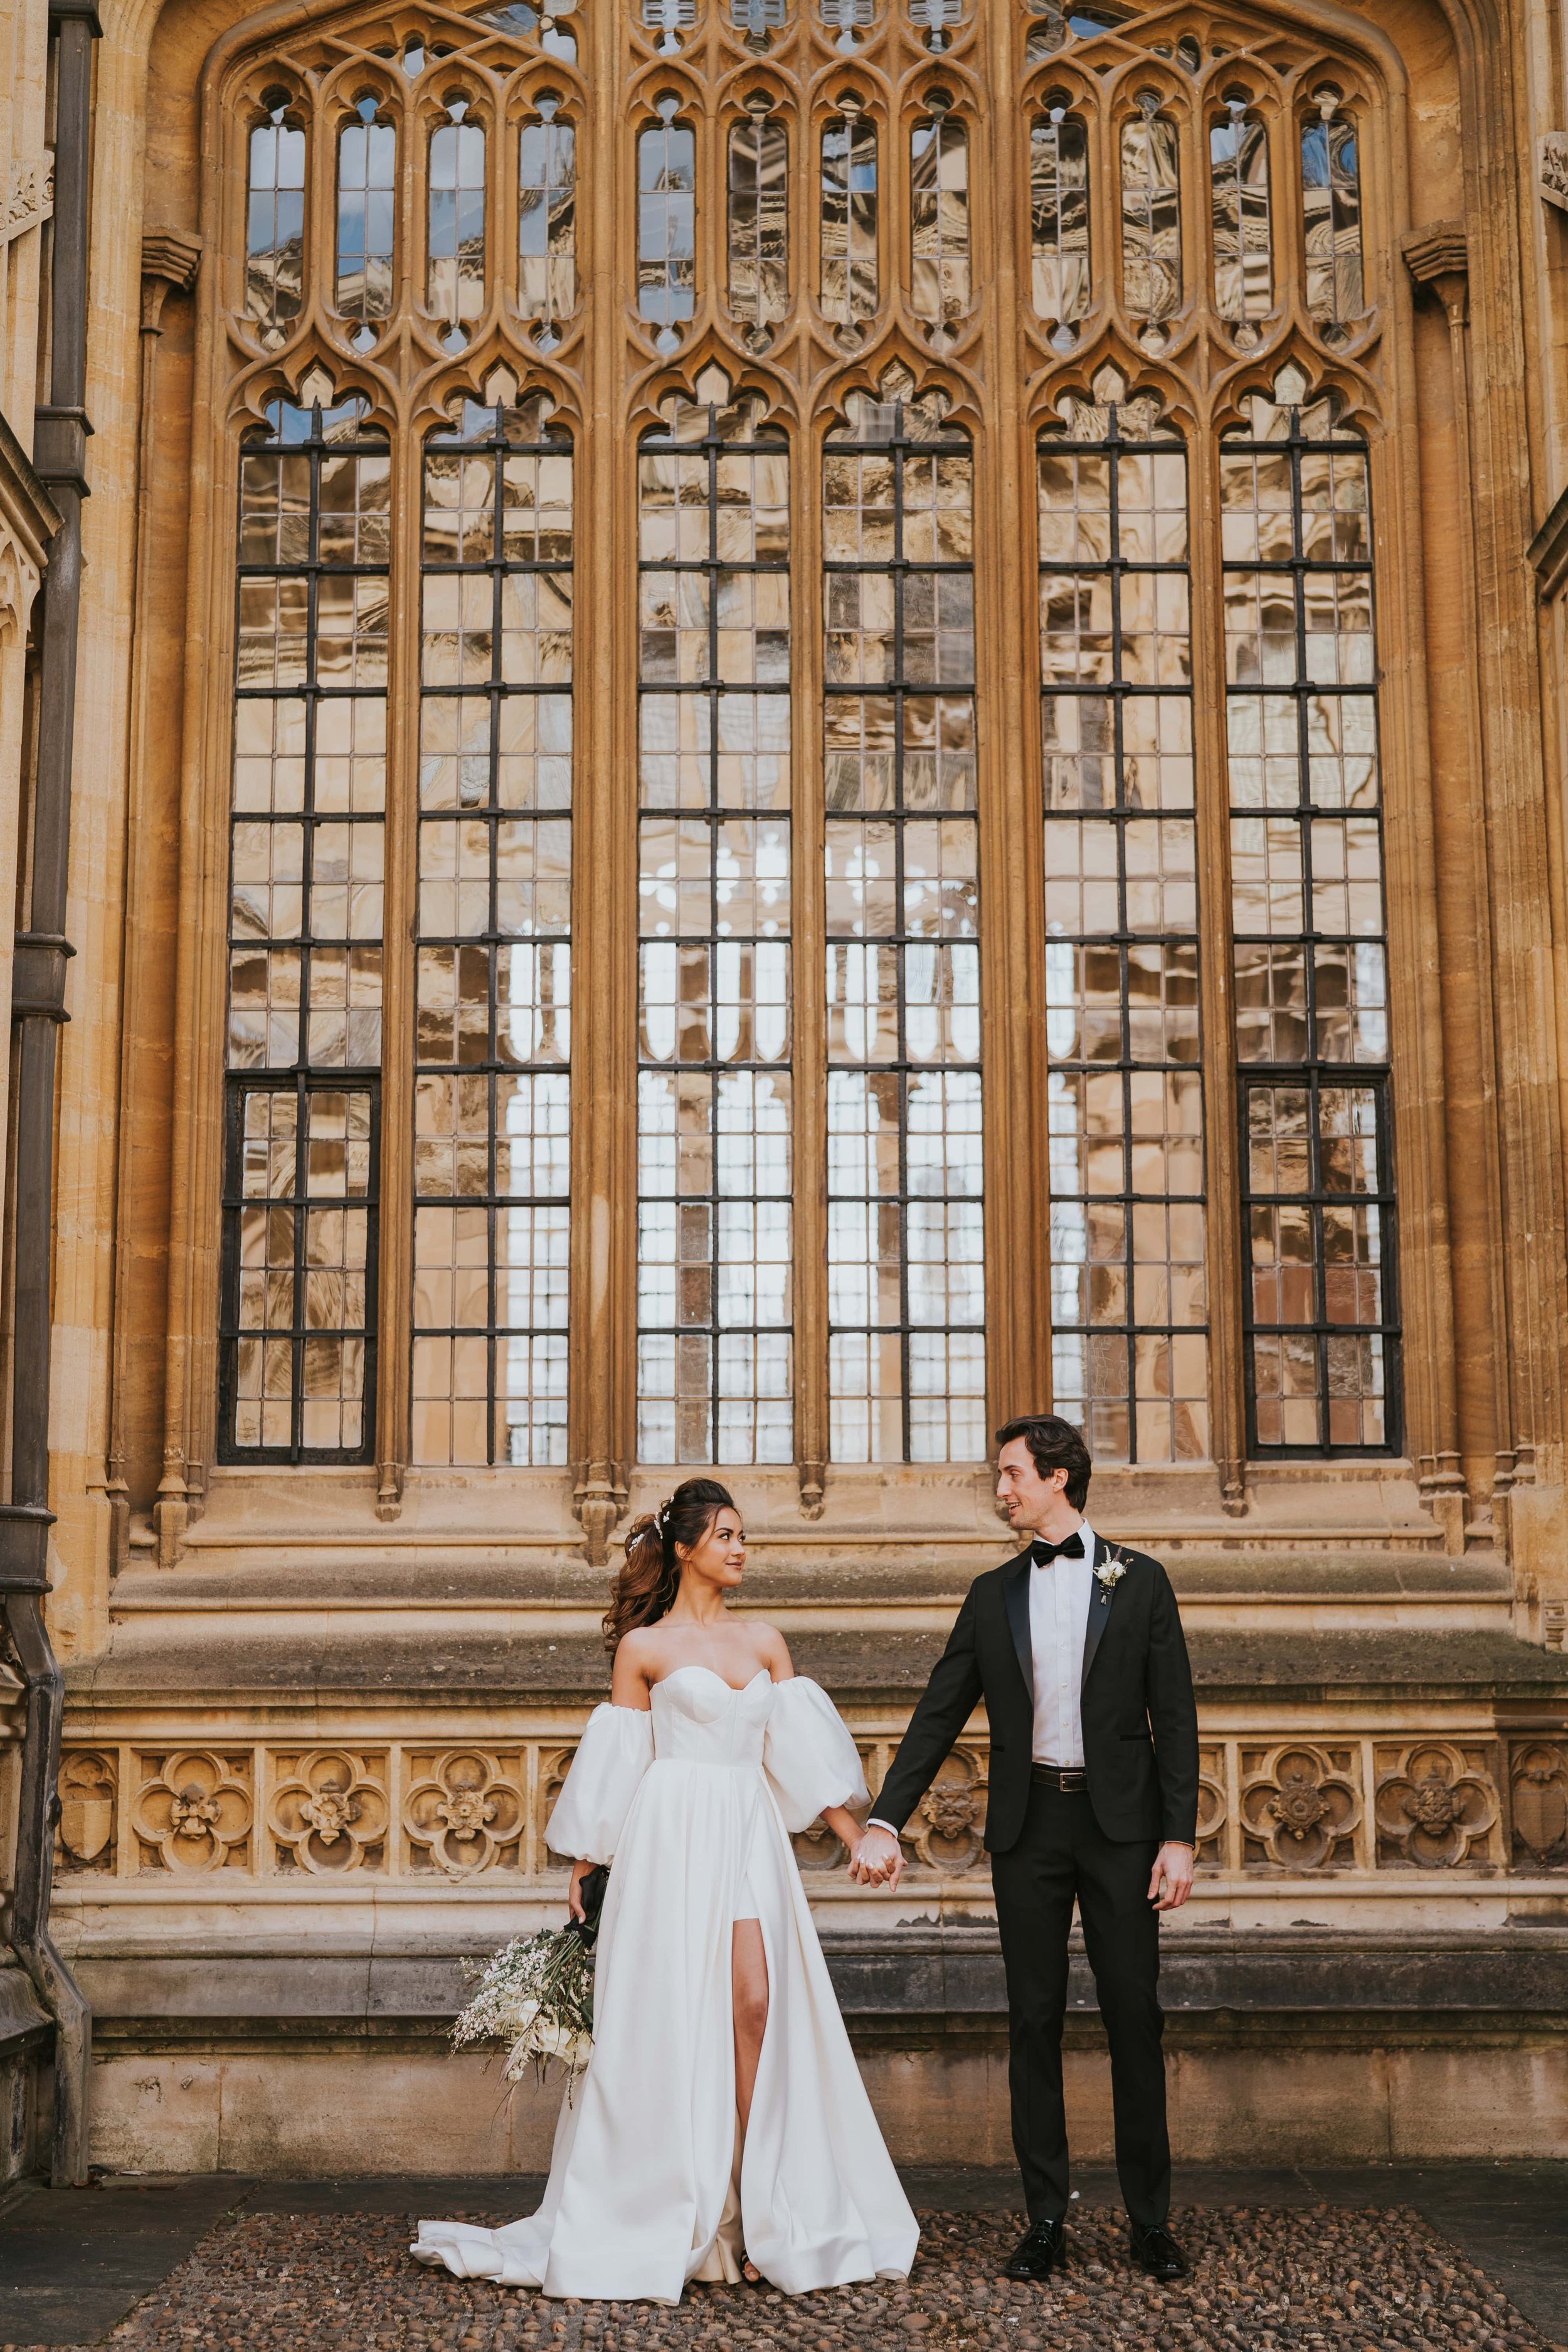 Bride and groom at the Bodleian Libraries